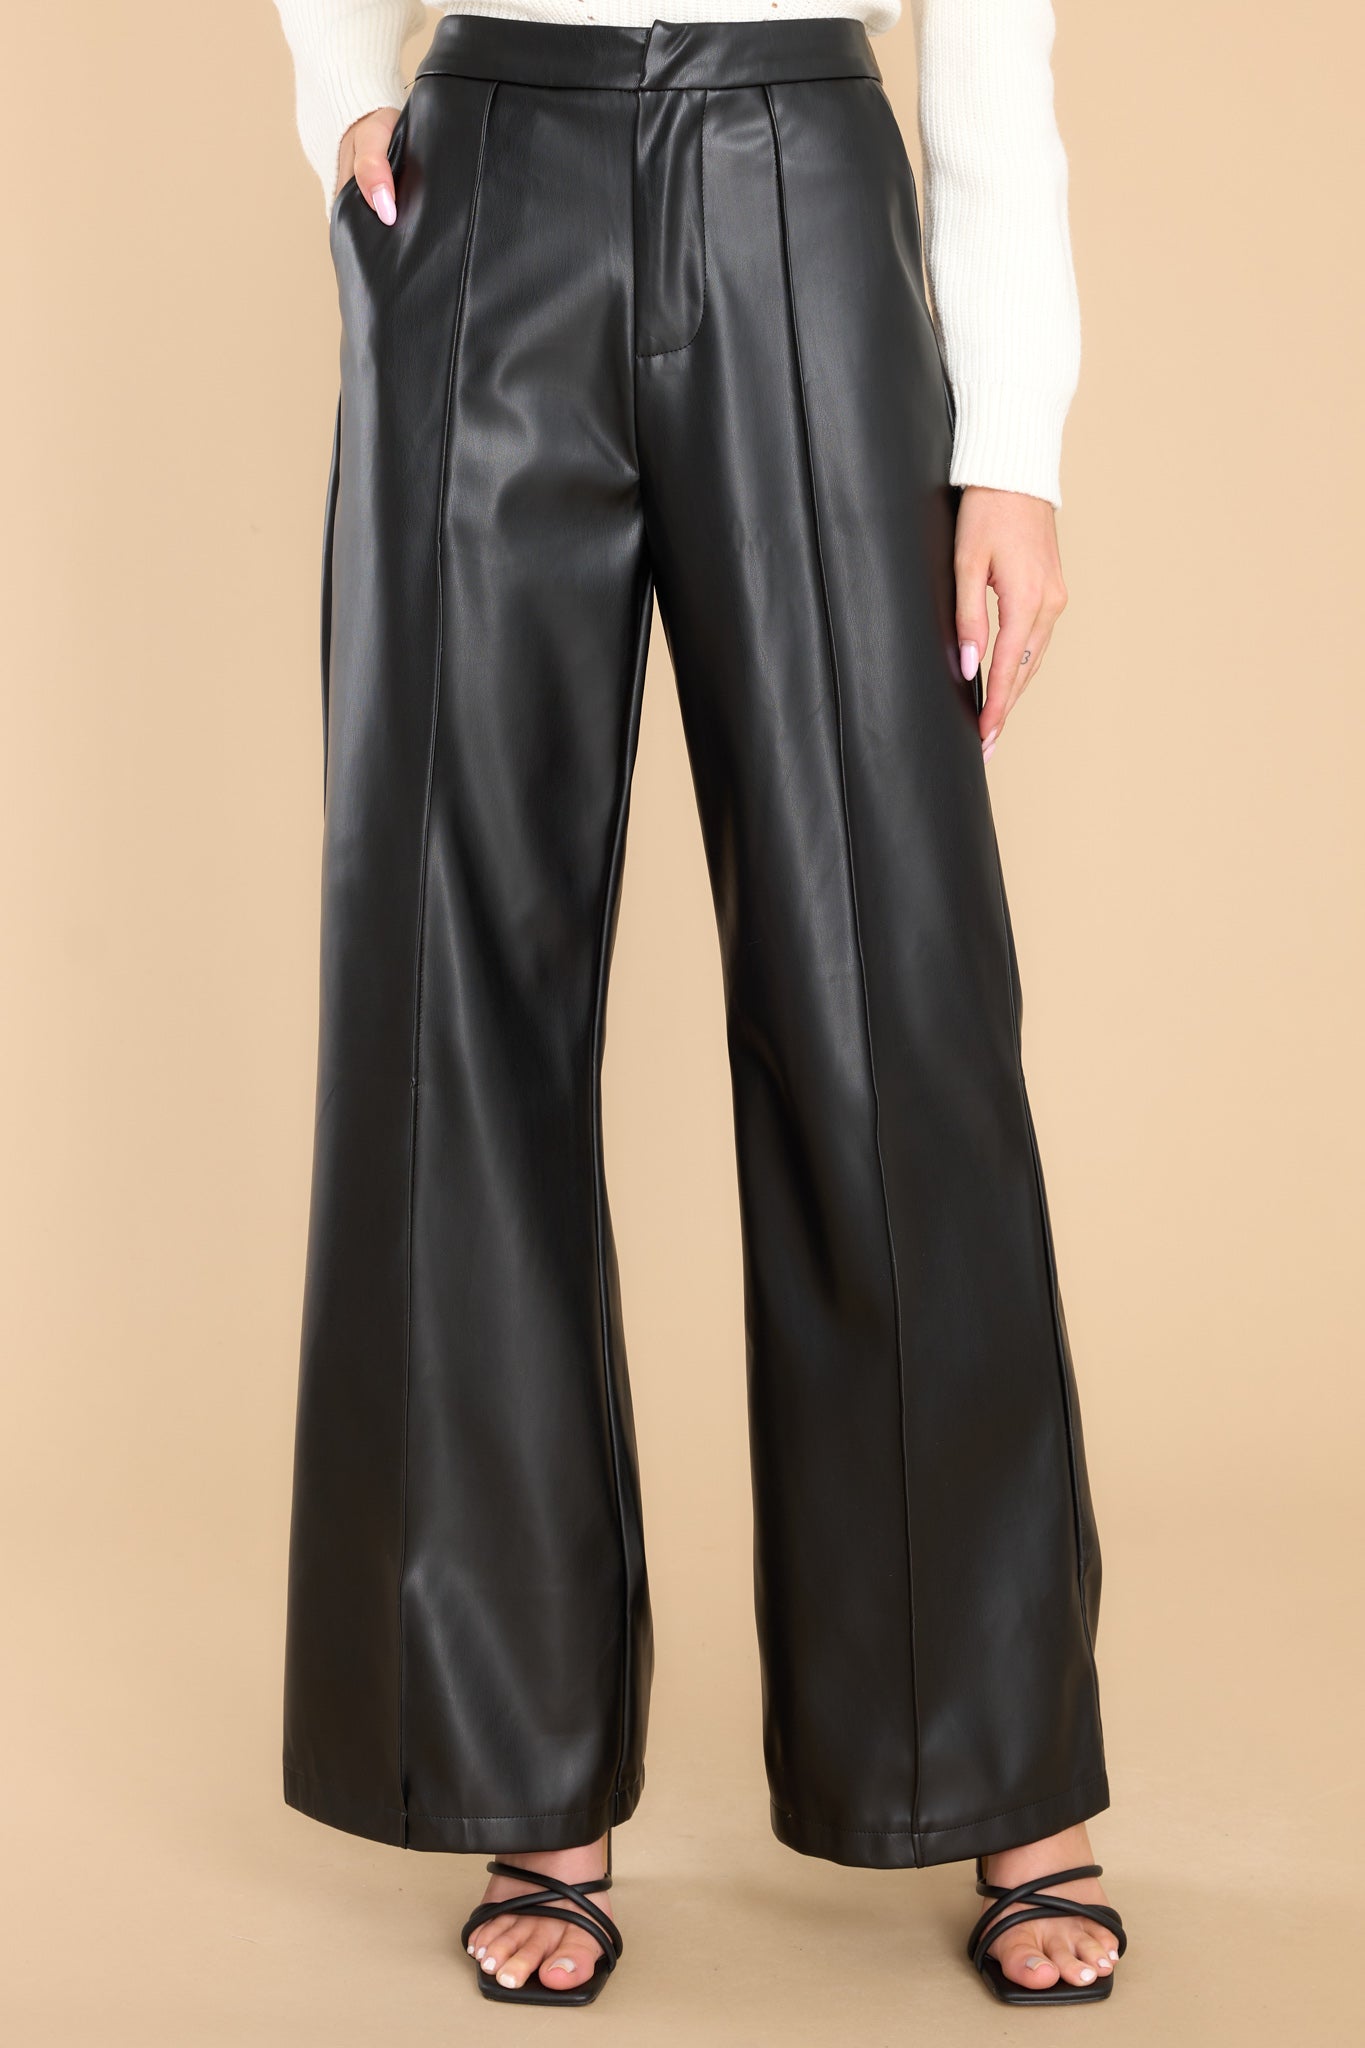 Stylish Black Faux Leather Pants - All Bottoms